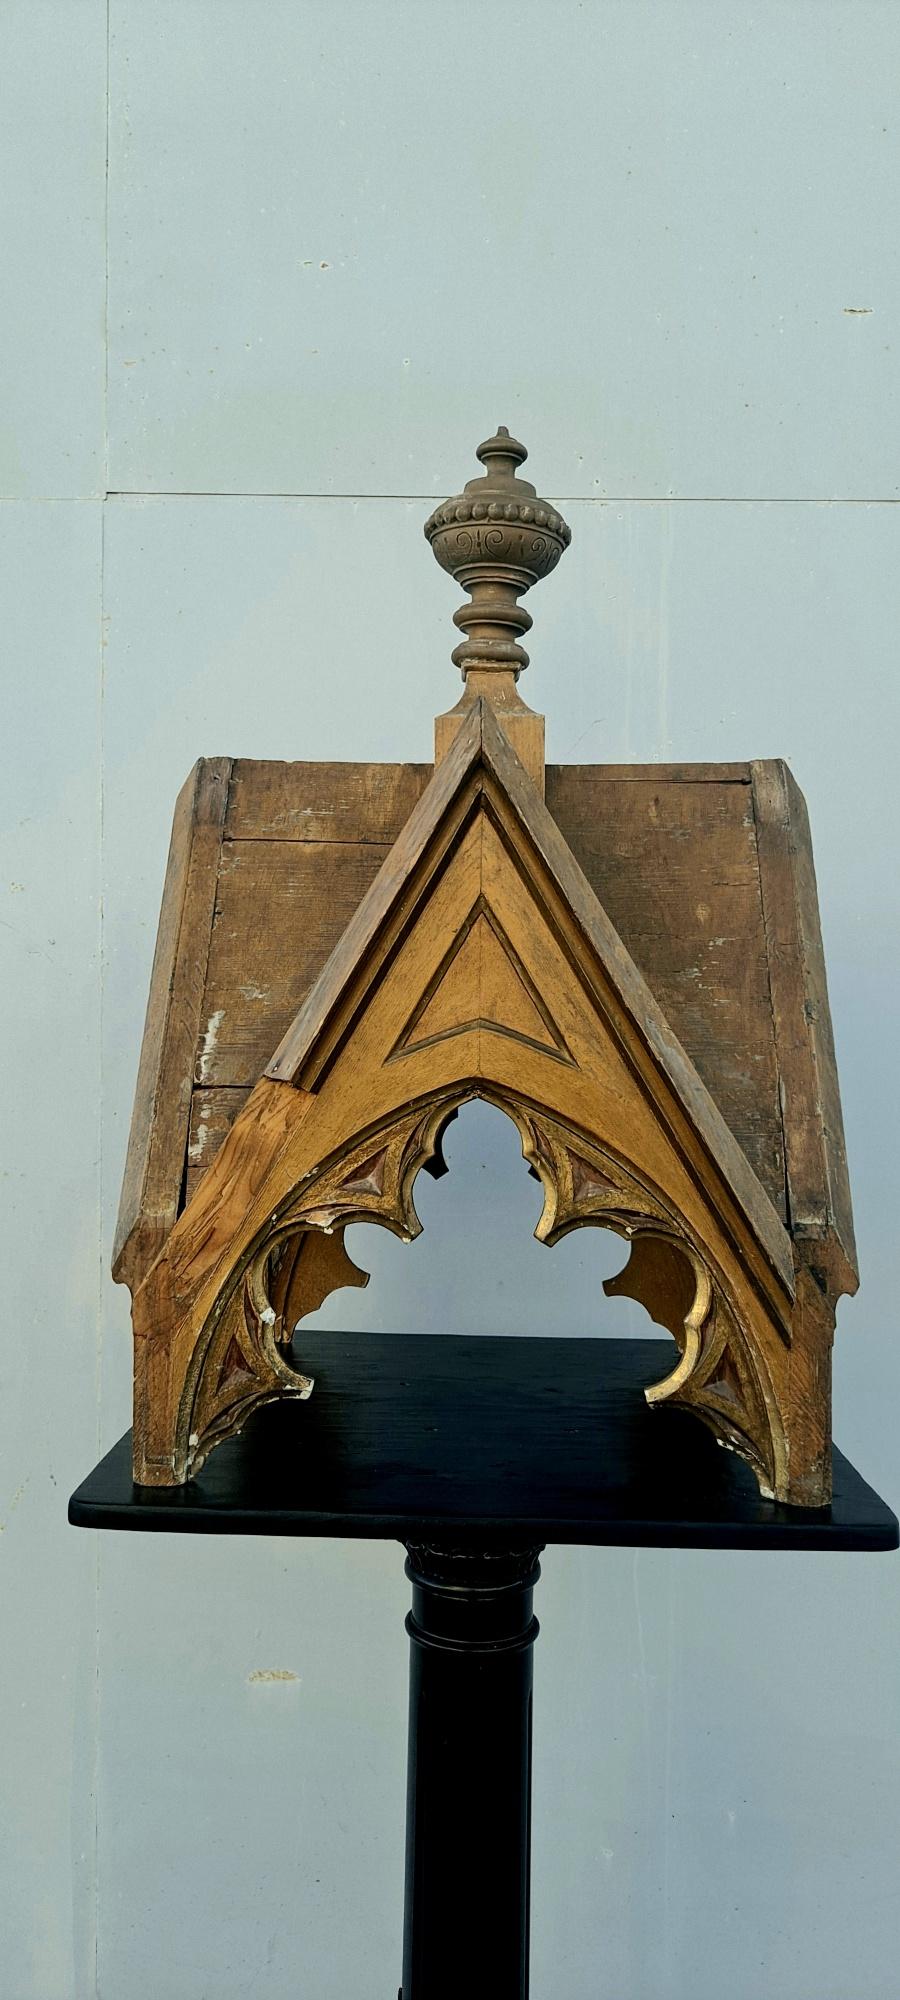 French antique birdhouse find it in Paris. We painted the base only the dome is in original condition and it is beautiful. Dimension of the dome
height 34.5 and the base on the bottom 23 x 23 inches.
Shipping to US continental is $475 in home